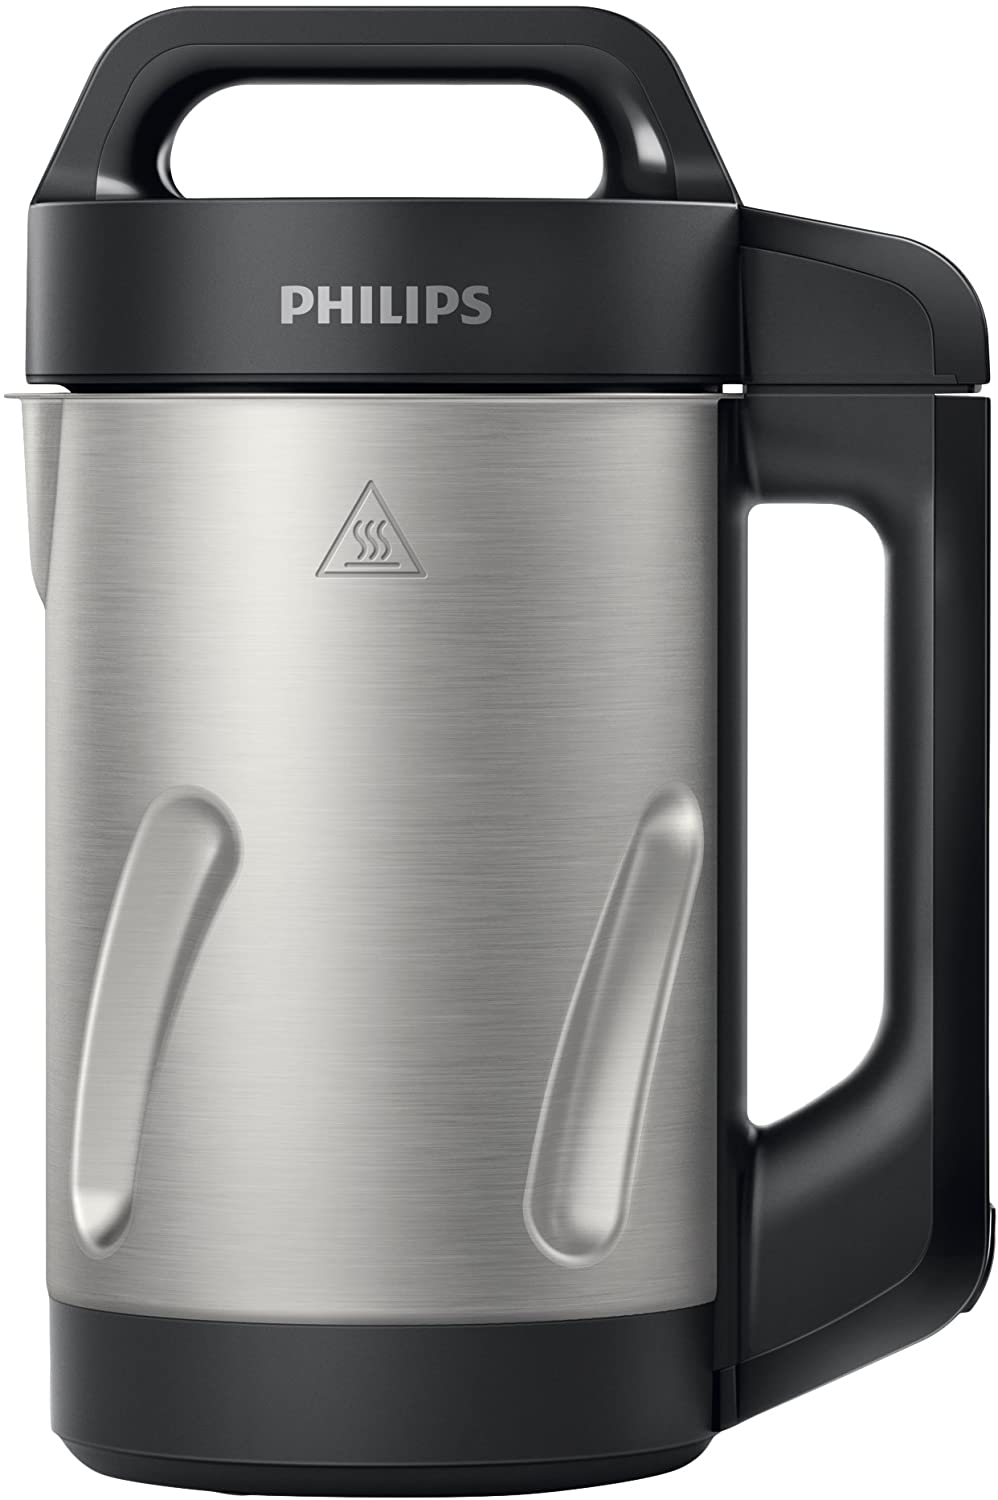 Philips Domestic Appliances Philips HR2203/80 Stand Mixer with Heating Function, Black, 1.2 L, 1000 W